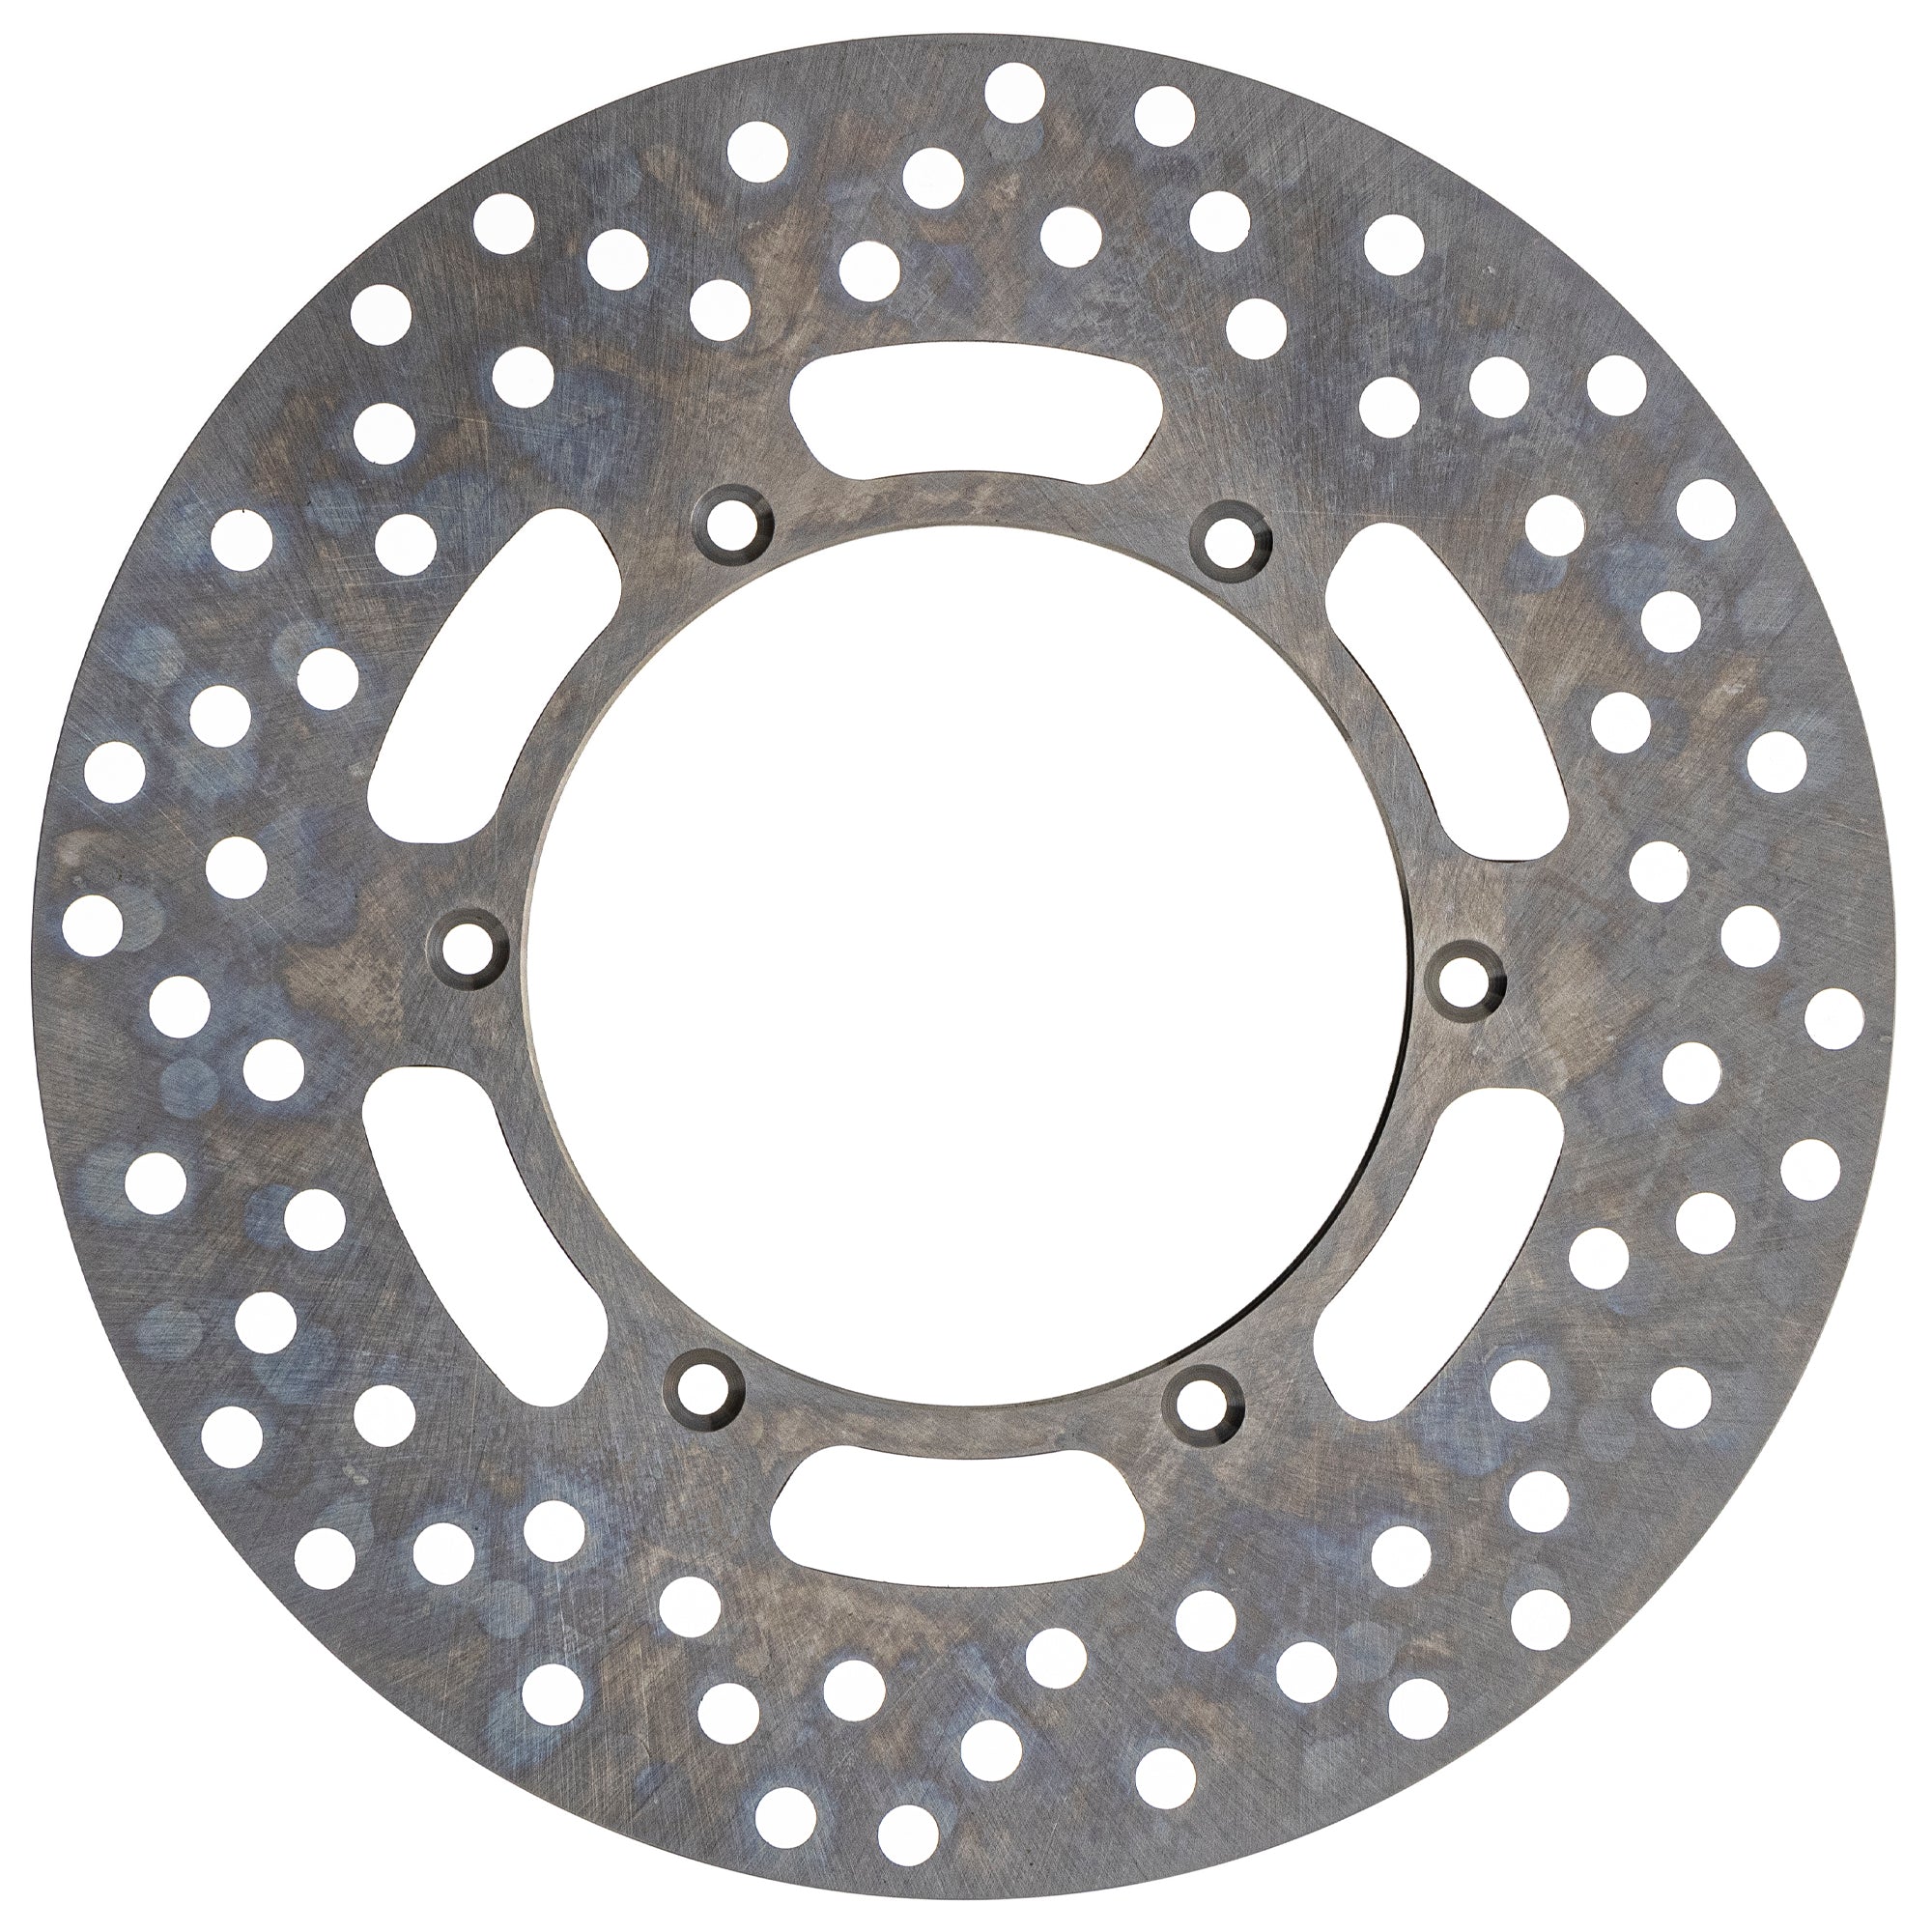 Brake Rotor for zOTHER RM250Z RM250 RM125 DRZ400S NICHE 519-CRT2223R